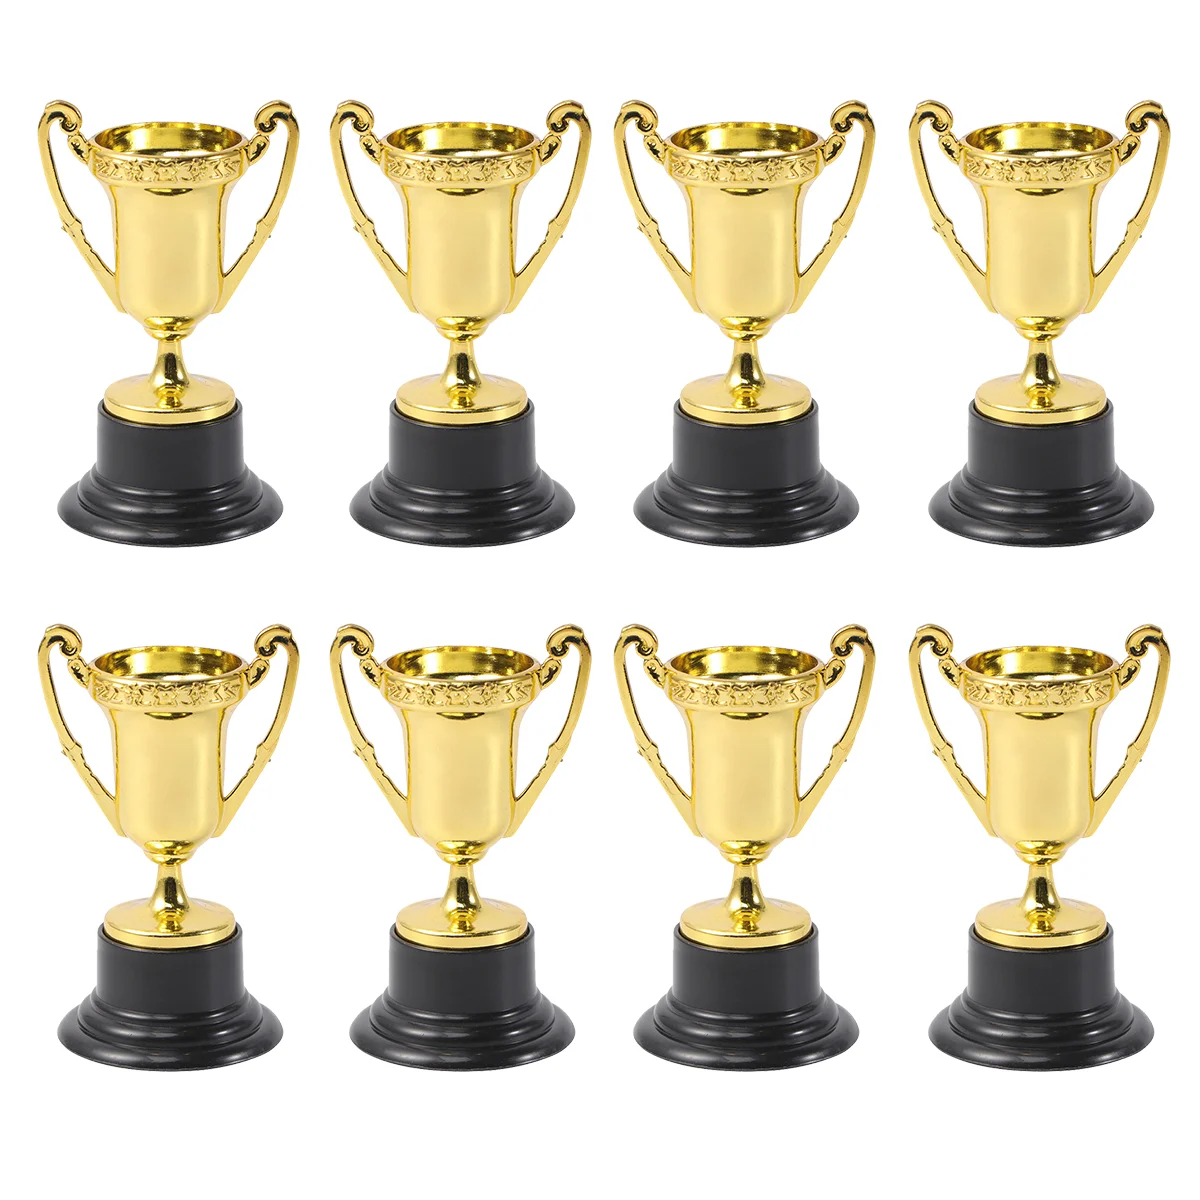 

Plastic Mini Trophy Student Sports Award Trophy with Base Reward Competitions Children Toys for Game Kindergarten